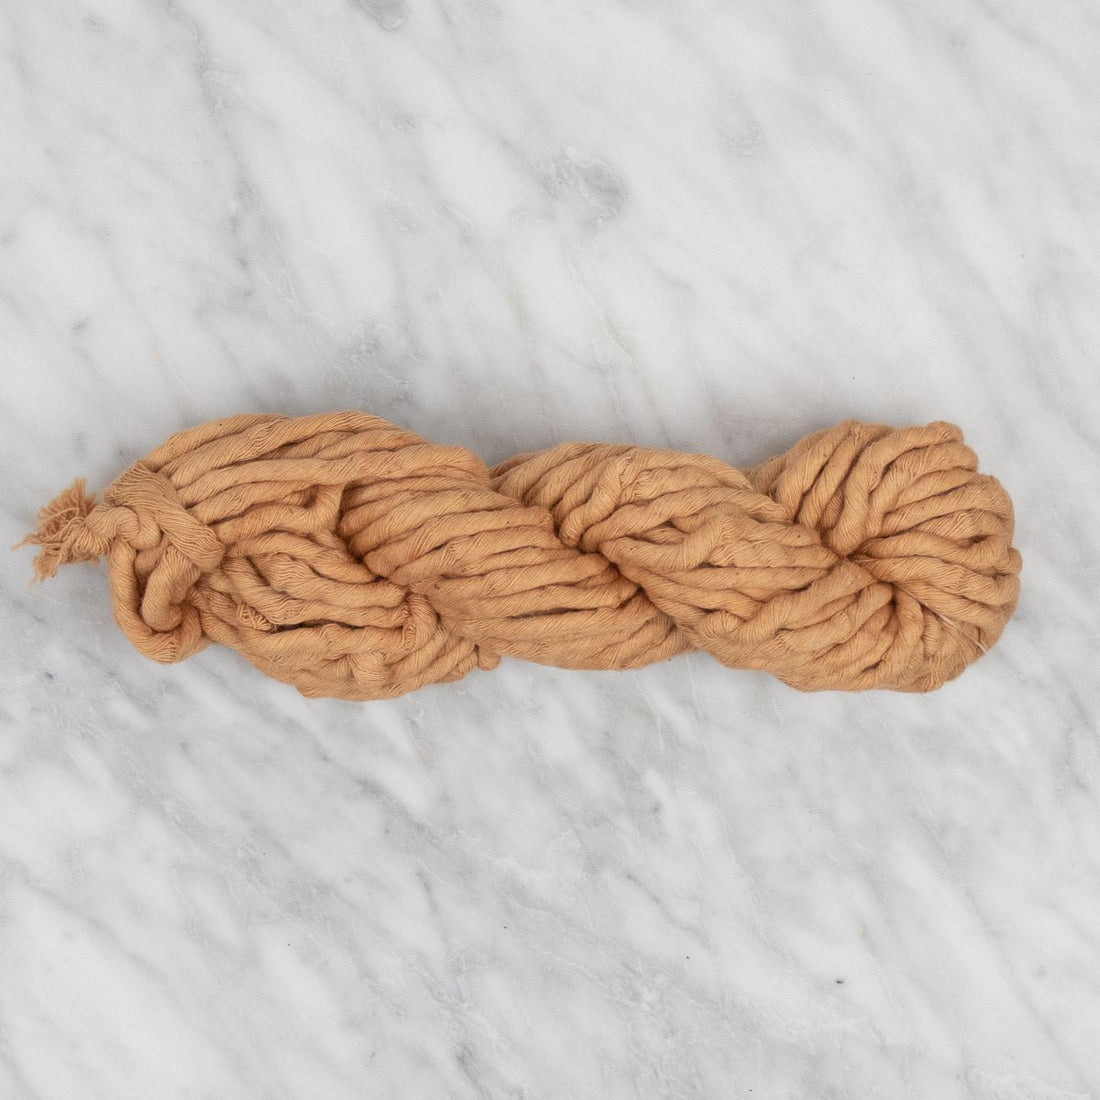 5mm Hand-Dyed Cotton String - Copper - 100 grams